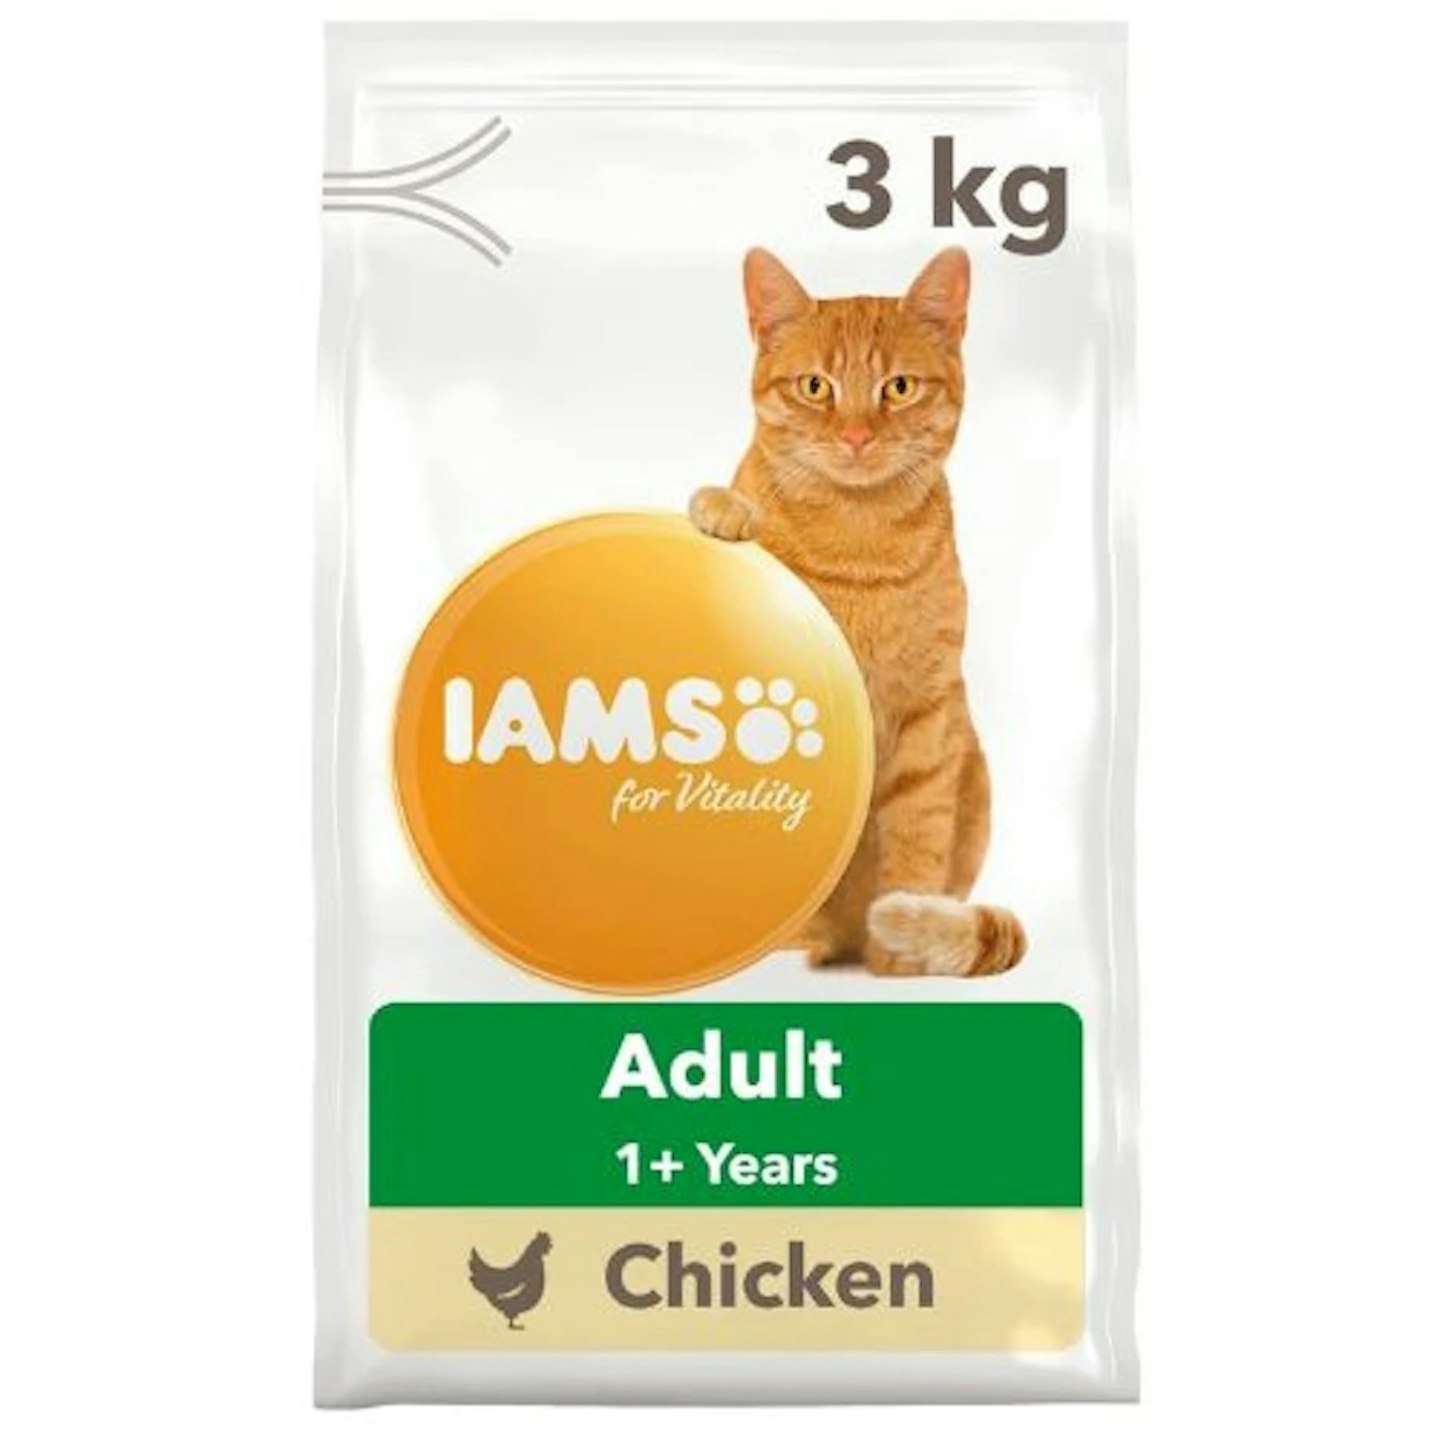  IAMS for Vitality dry cat food with chicken